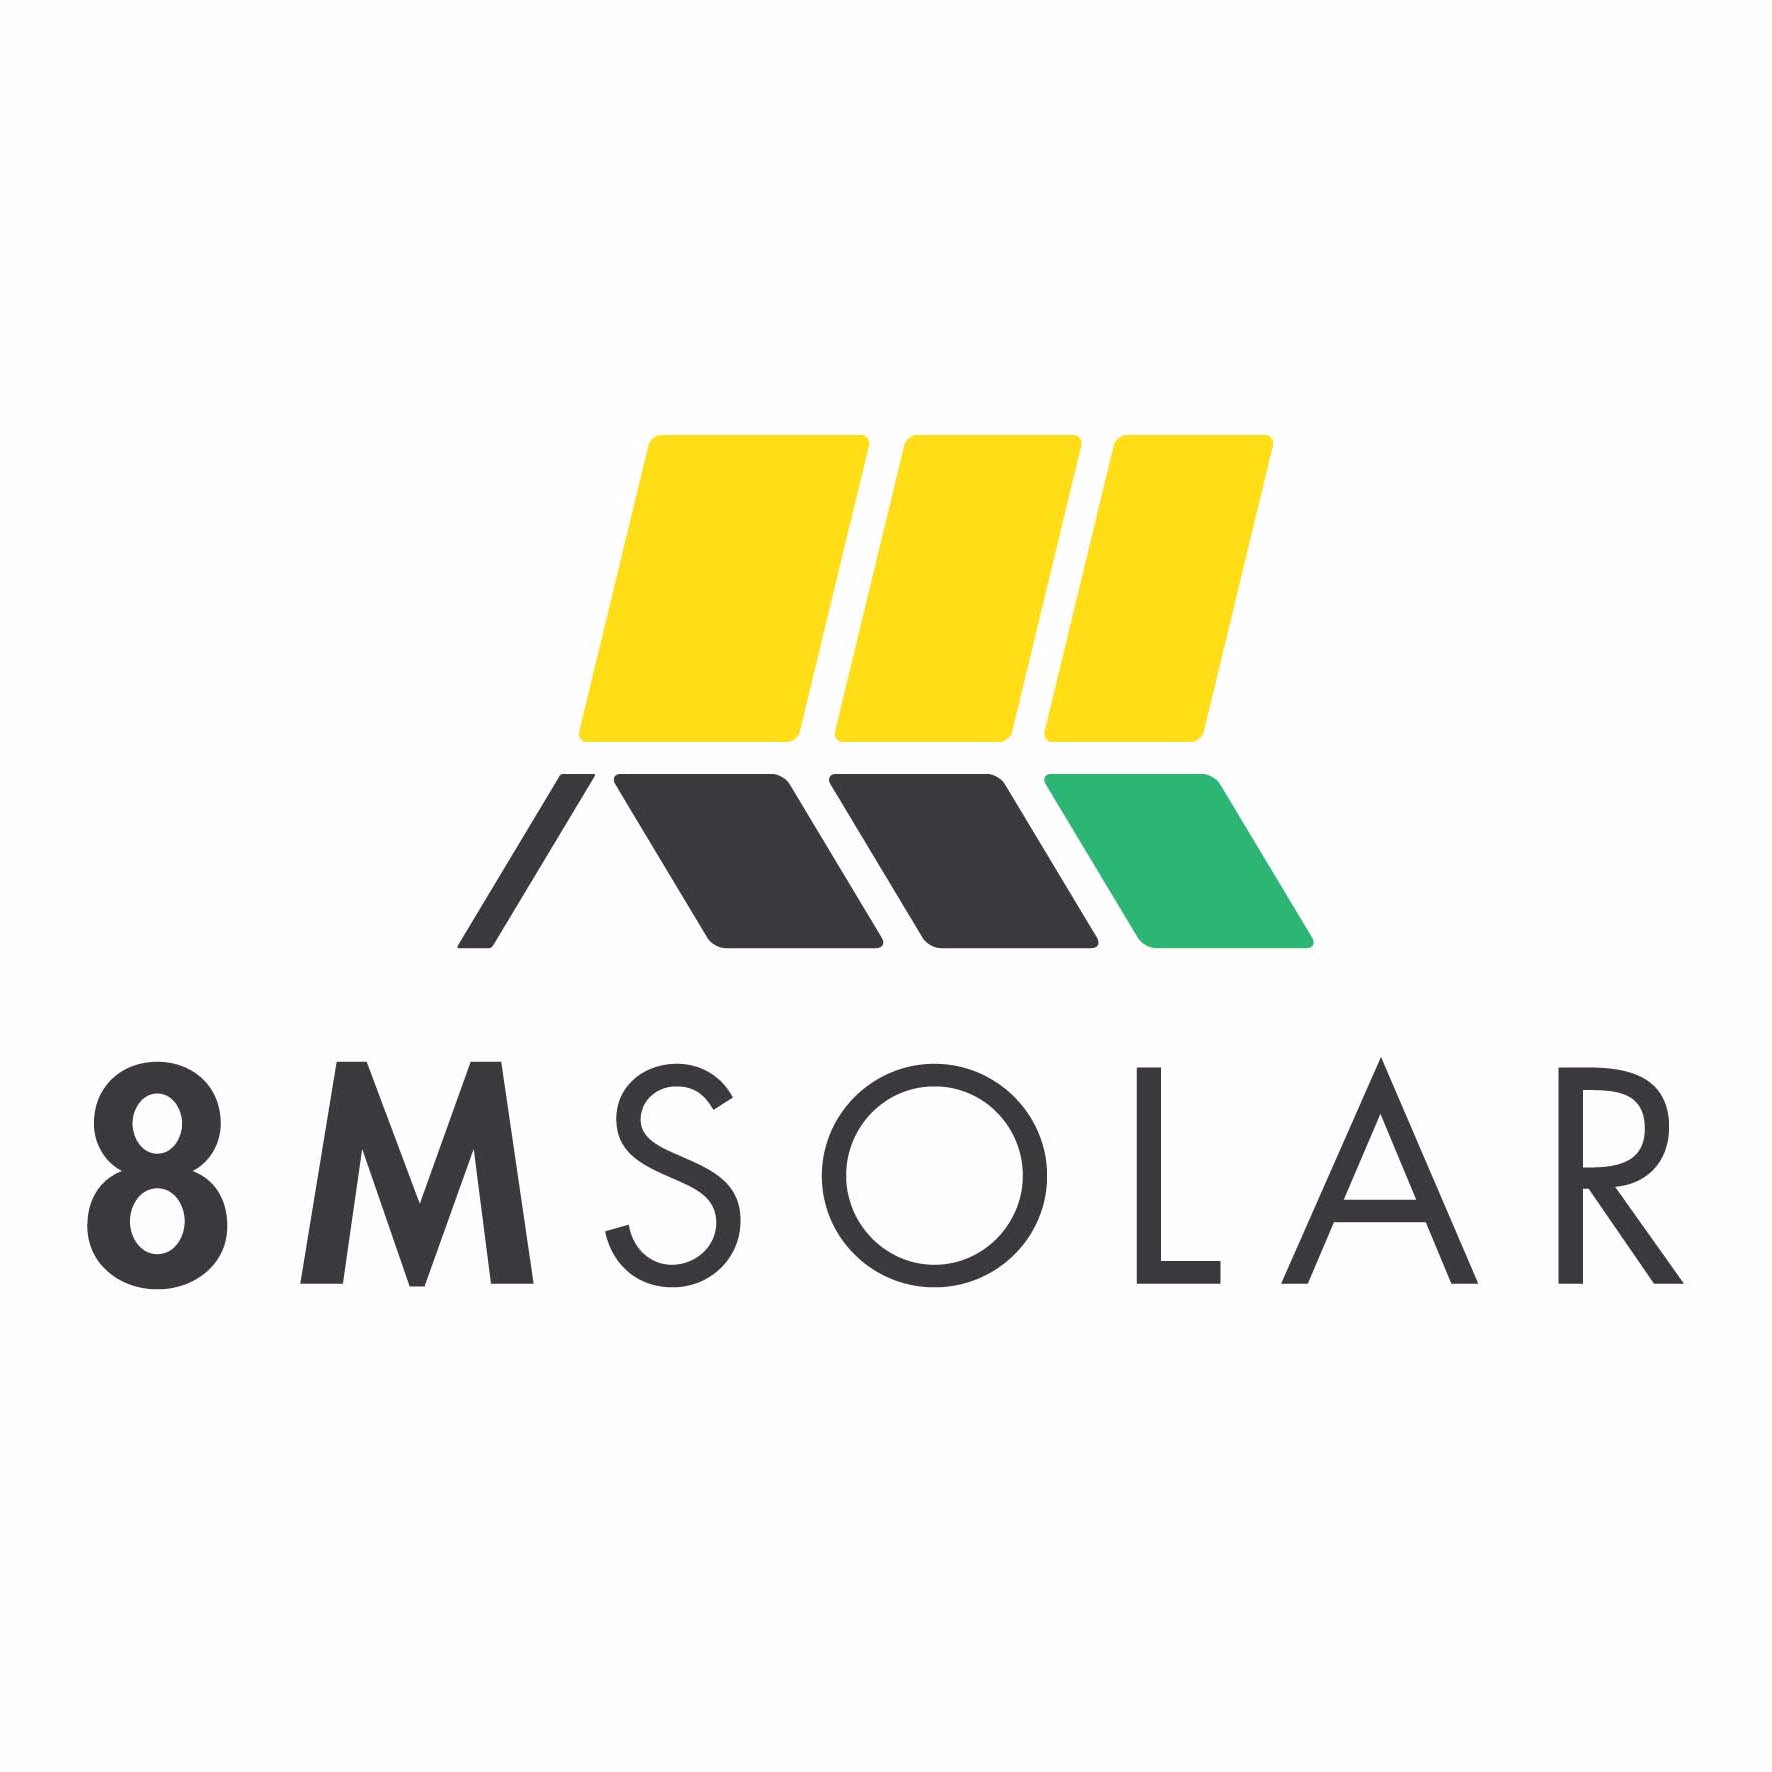 Premier solar designers & installers in North Carolina and neighboring states!